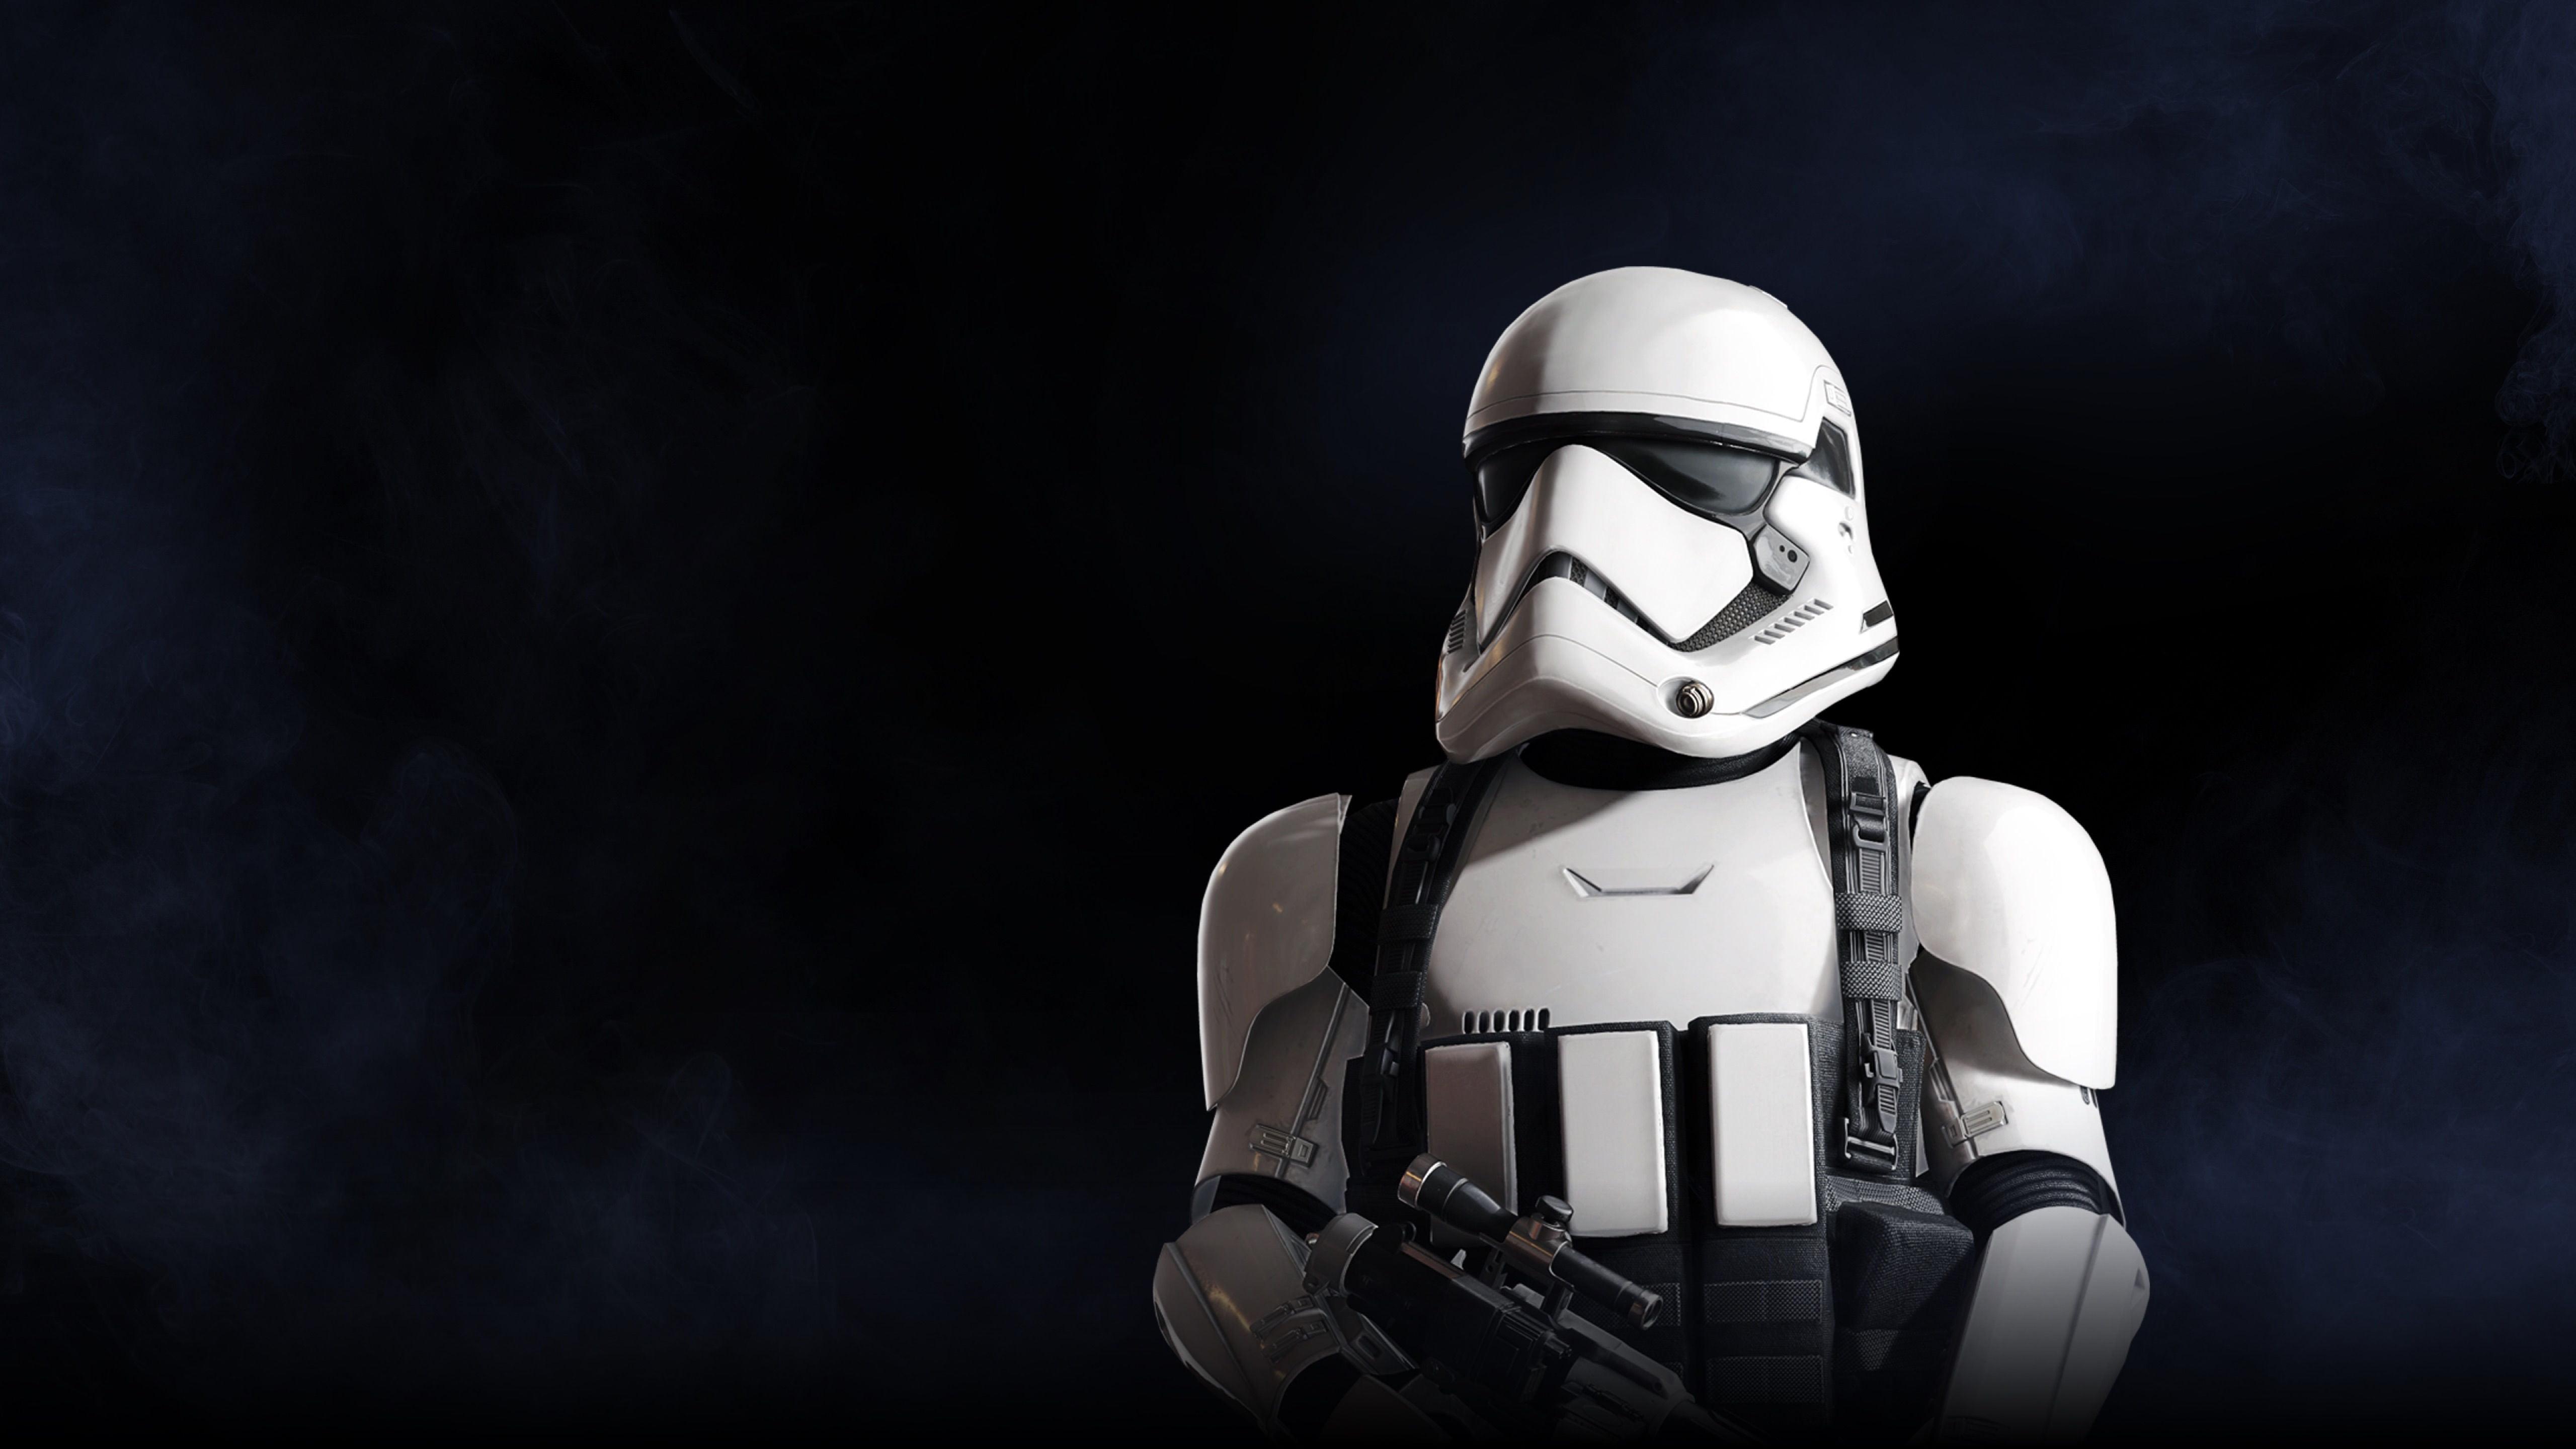 Battle Android Troopers Wallpapers Wallpaper Cave Images, Photos, Reviews